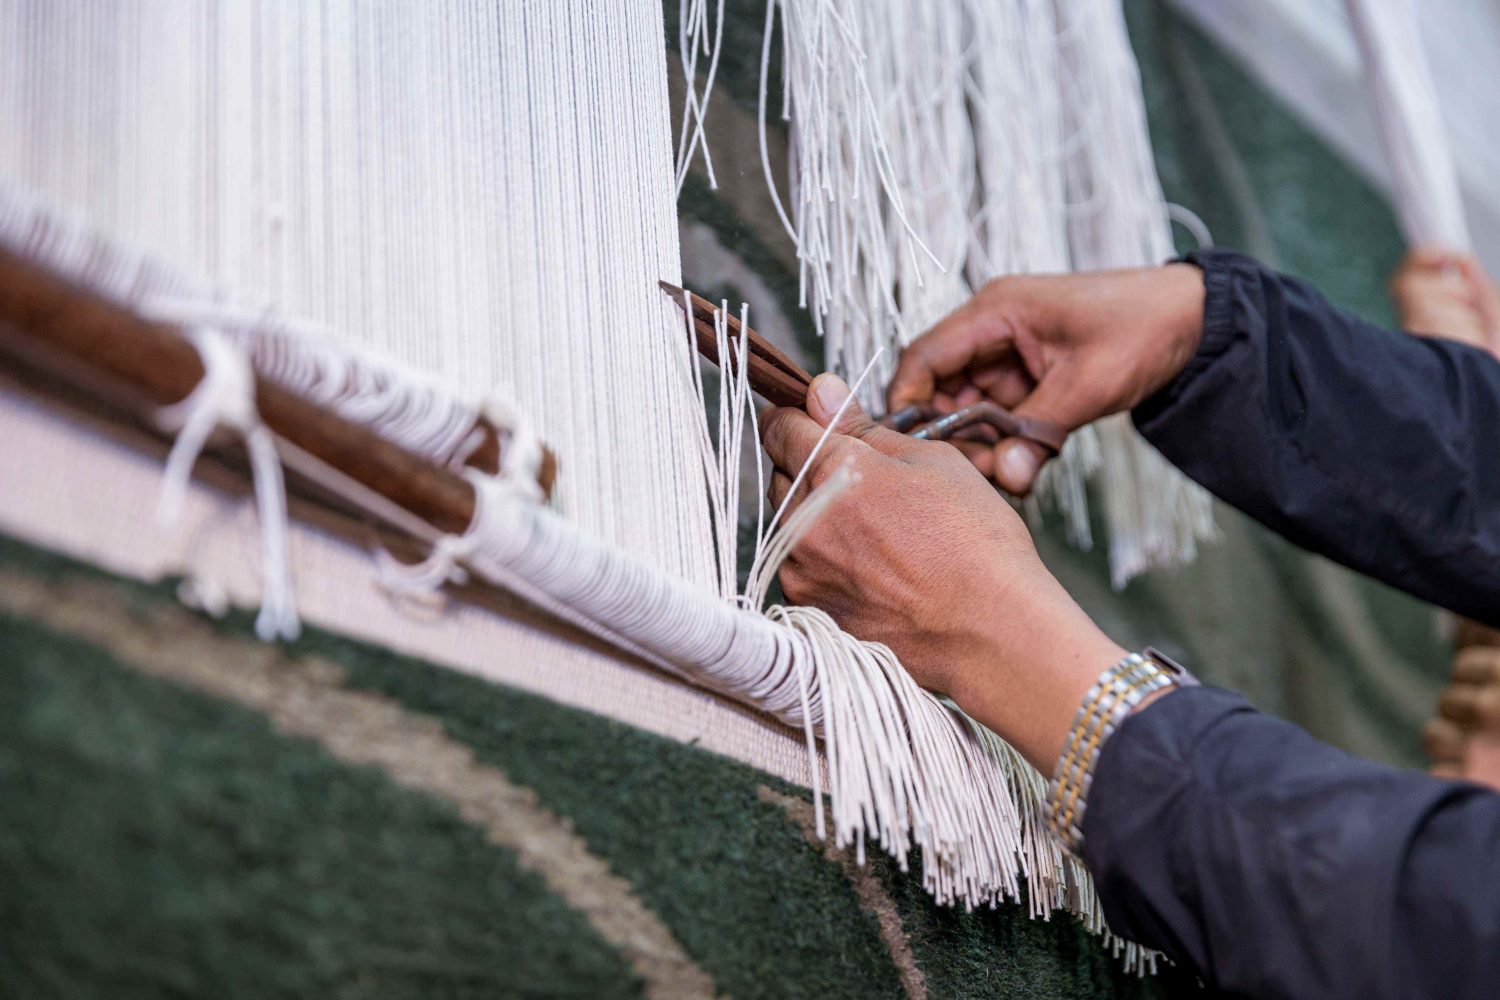 A Hand Knotted Rug Being Cut Off The Loom in Our Factory in Nepal, Photographed by Anup Paudel